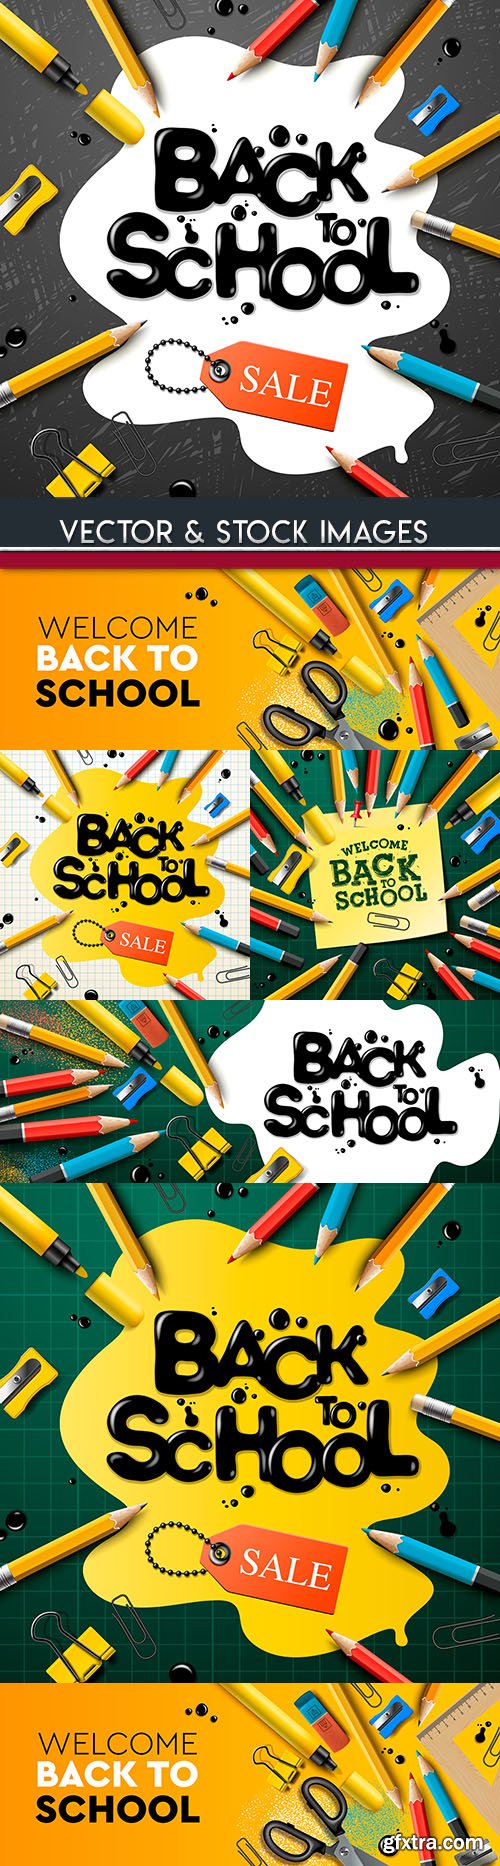 Back to school and accessories element illustration 23